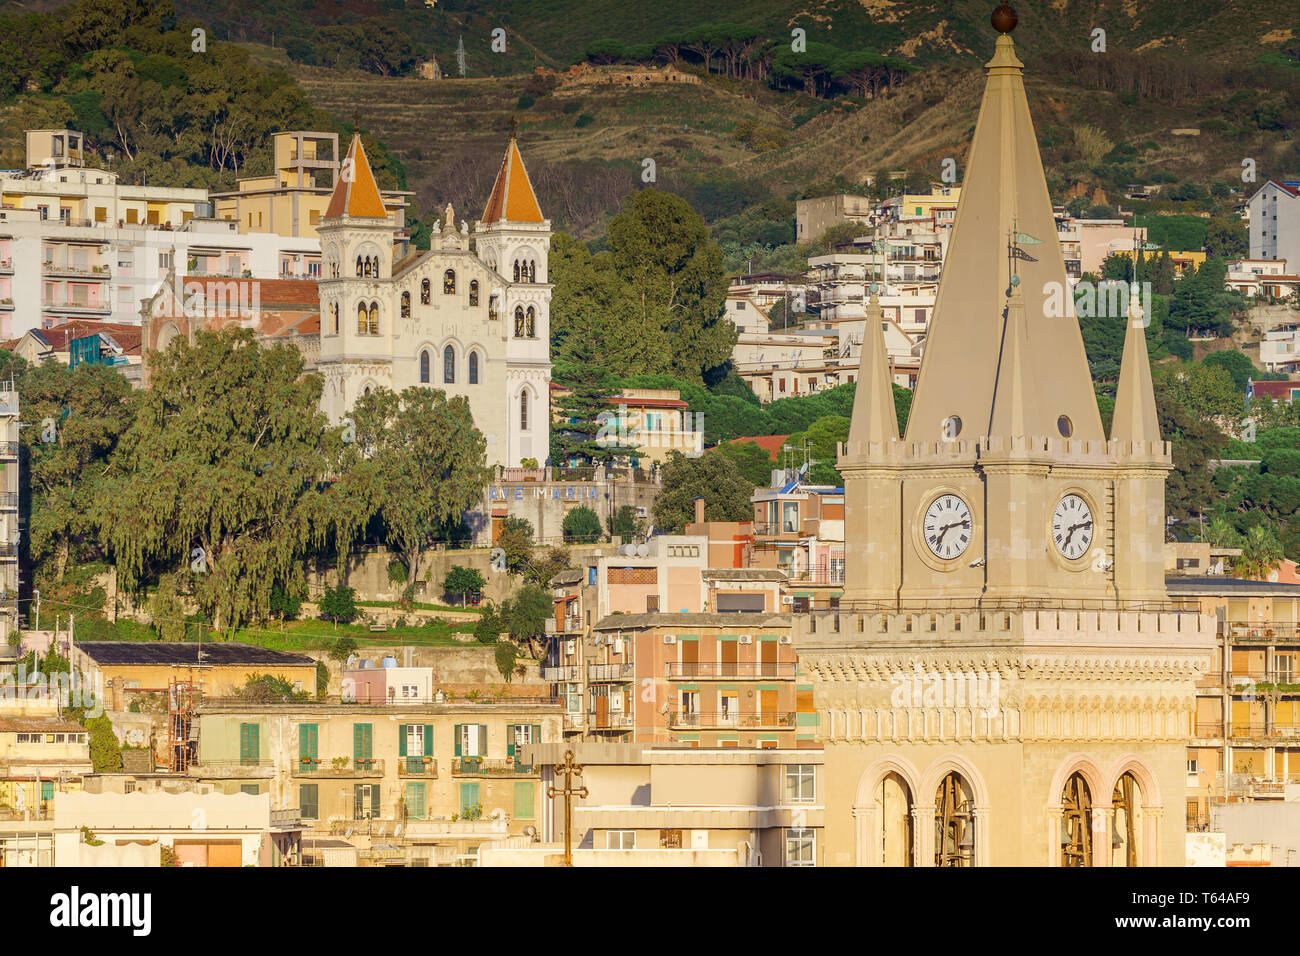 Panoramic view of the Messina.Duomo di Messina or Messina Cathedral. Sicily. Italy Stock Photo